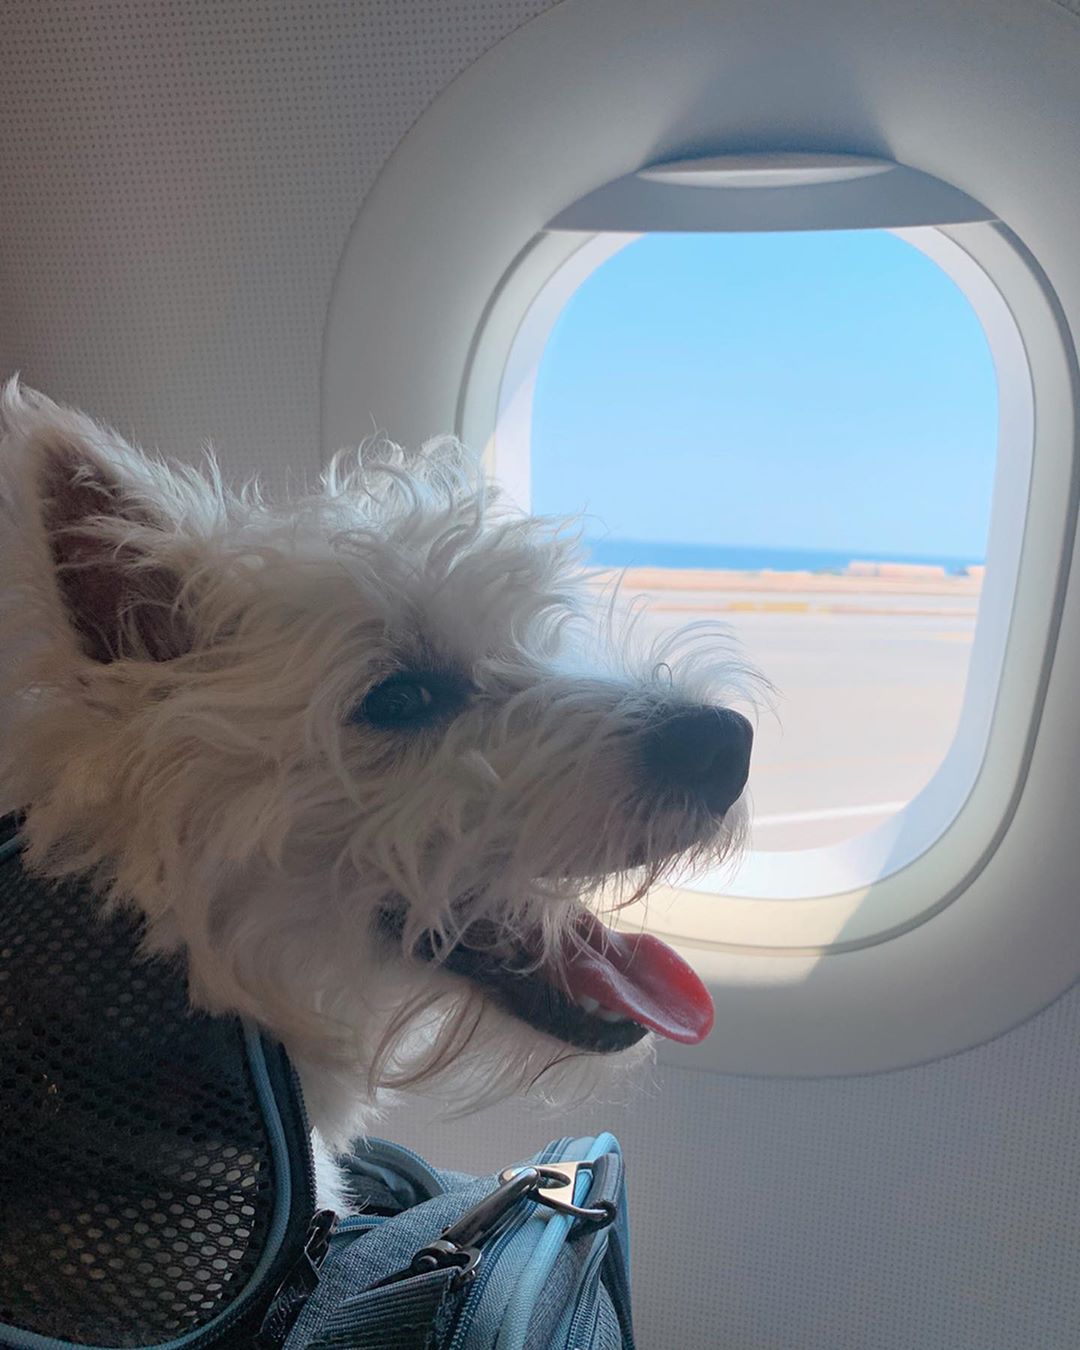 Westie puppy in a travel bag at the airplane window